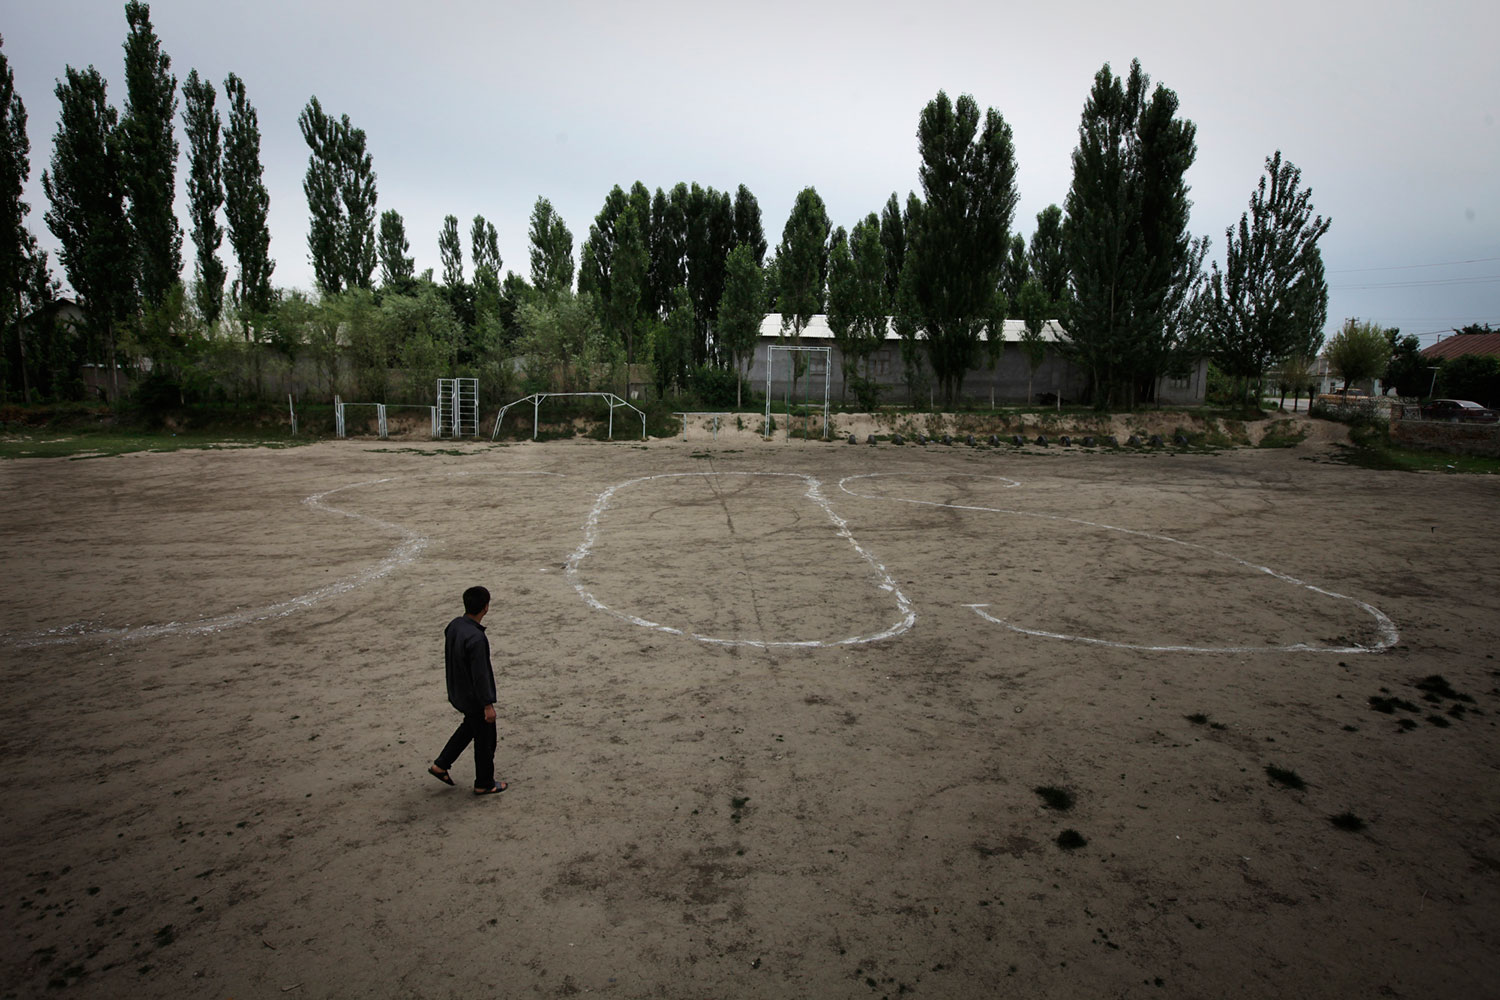 Uzbek enclave near Osh, Kyrgyzstan. June 17, 2010.
                               Ethnic Uzbeks painted a large SOS symbol on a soccer field, hoping that planes from Uzbekistan would see them and heed their call for help, when ethnic violence broke out between the Kyrgyz majority and Uzbek minority in Kyrgyzstan.